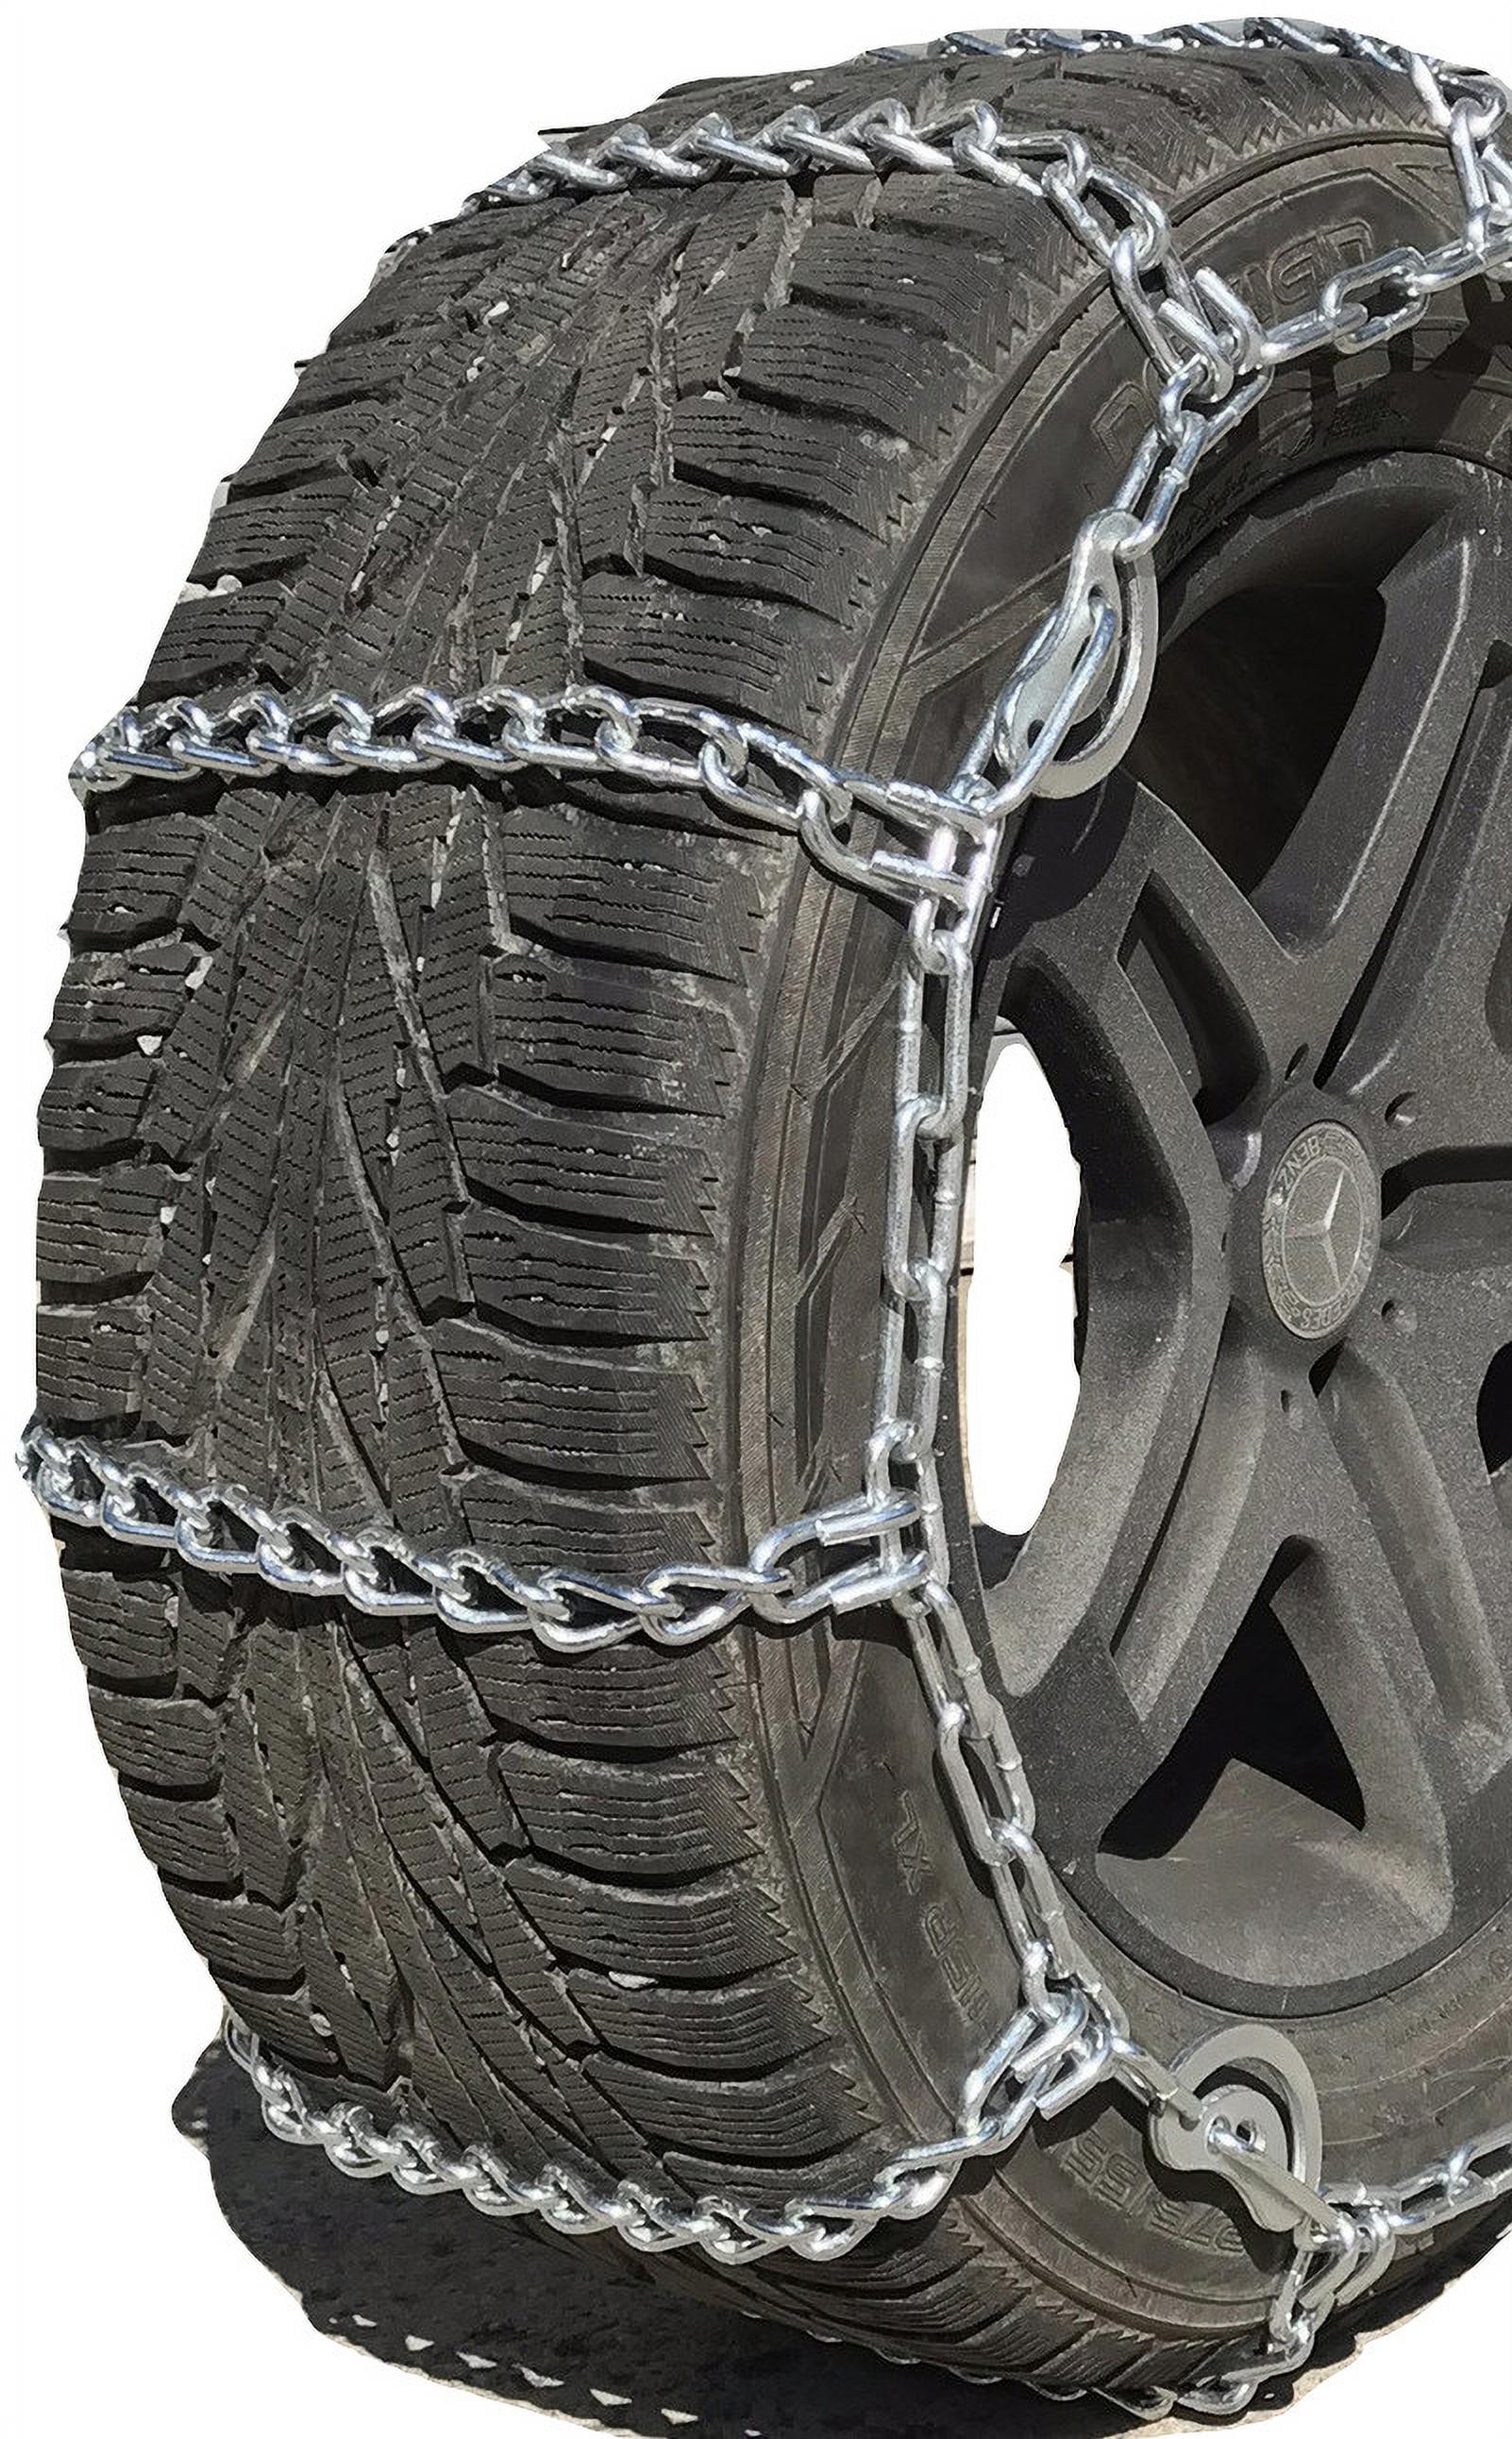 Tirechain Compatible With Ram 3500 Big Horn 4X2 2016 Lt285/60R20 Load Range E Tire Chains - image 1 of 3